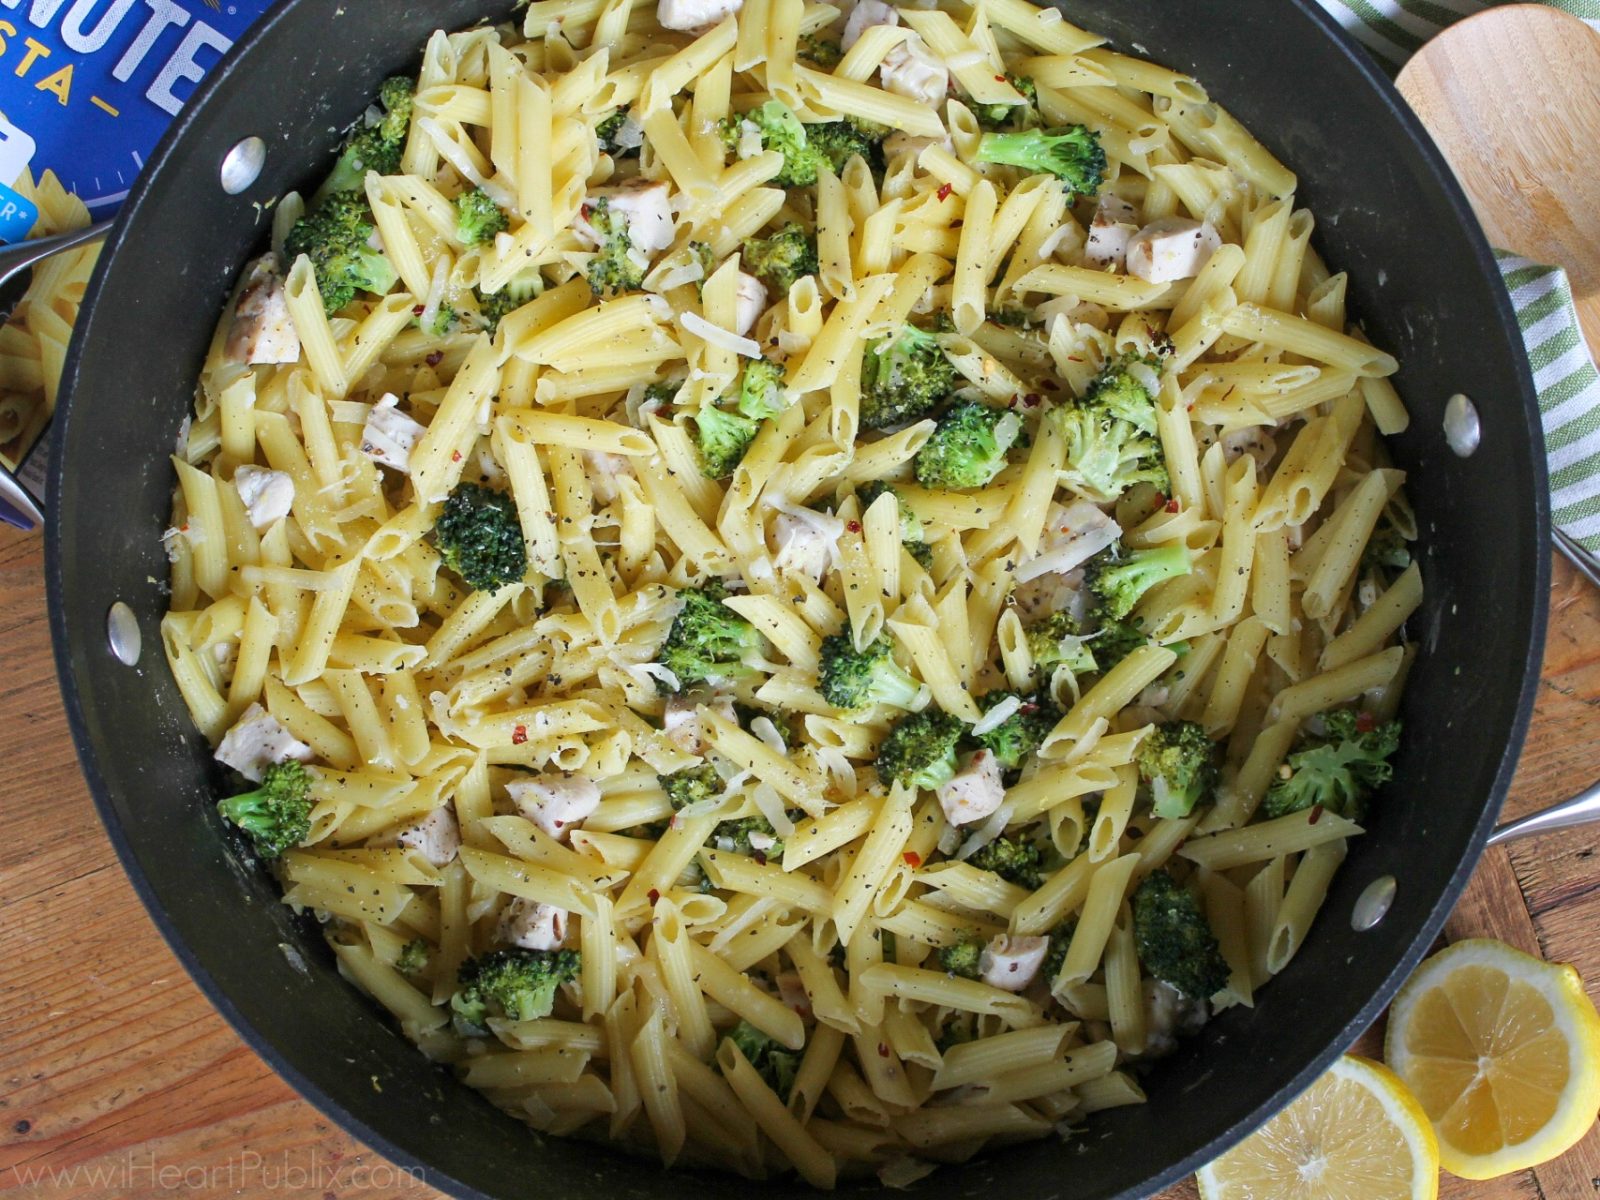 Lemony Broccoli Pasta & Chicken Skillet – Amazing Recipe For Your Busy Weeknight